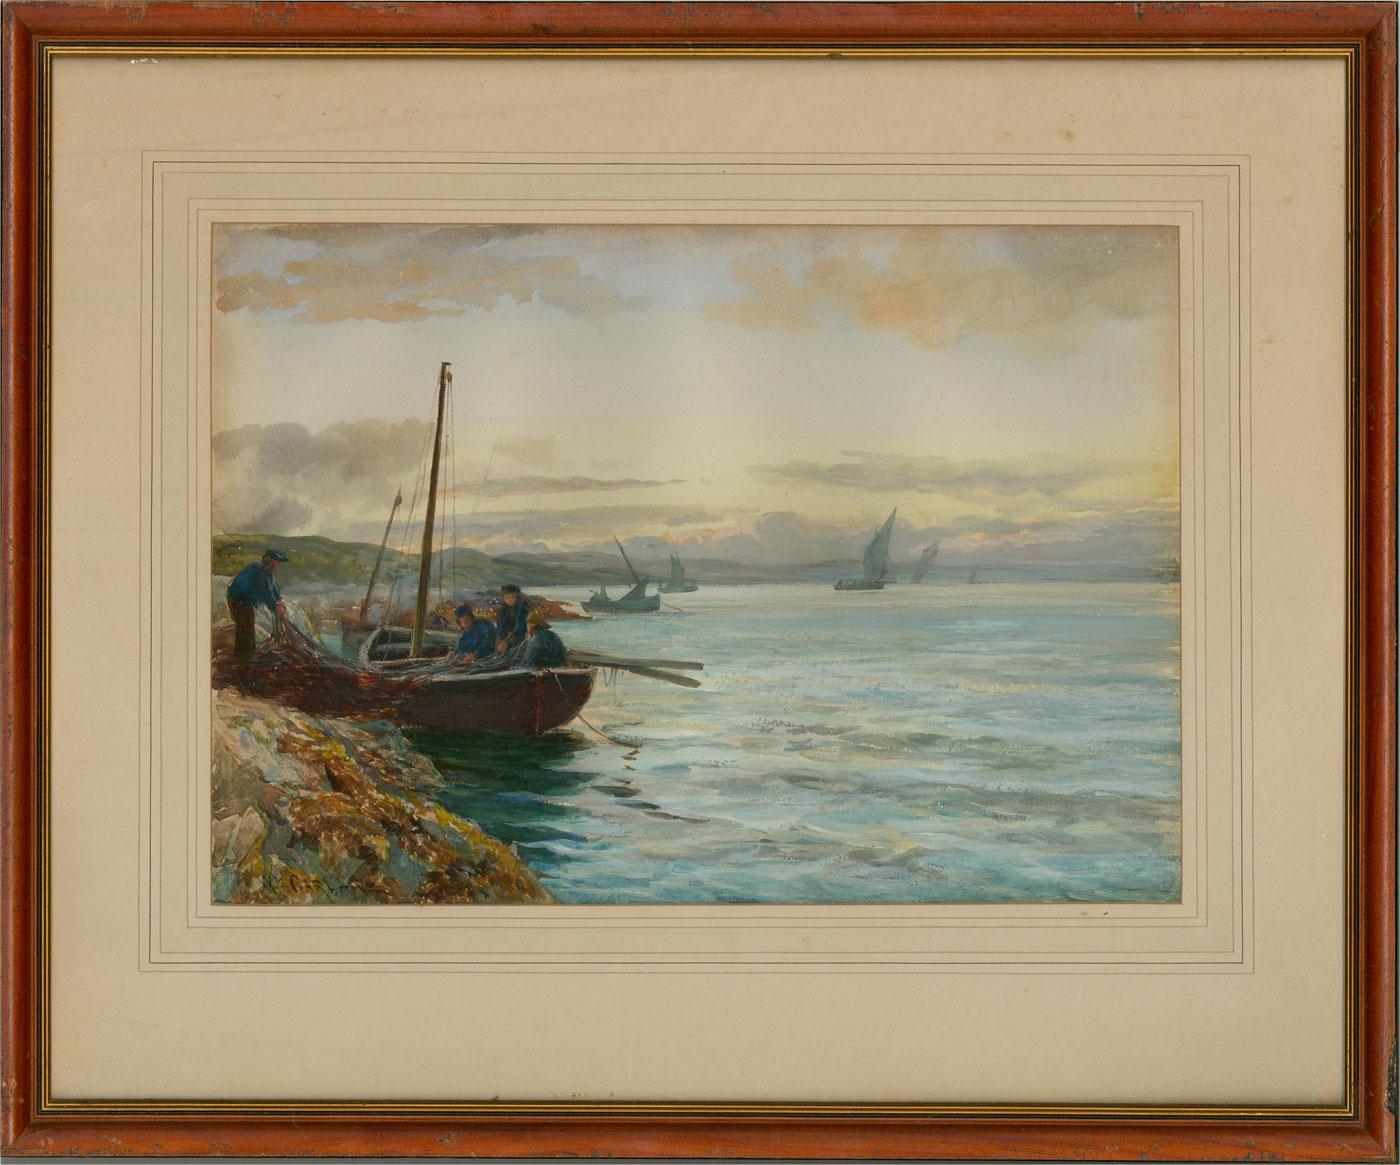 A fine gouache and watercolour painting by the artist William Carlaw RSW. The scene depicts a seascape with four fishermen handling a large net. The skilful application of colour and precise brush strokes clearly highlight the artist's proficiency